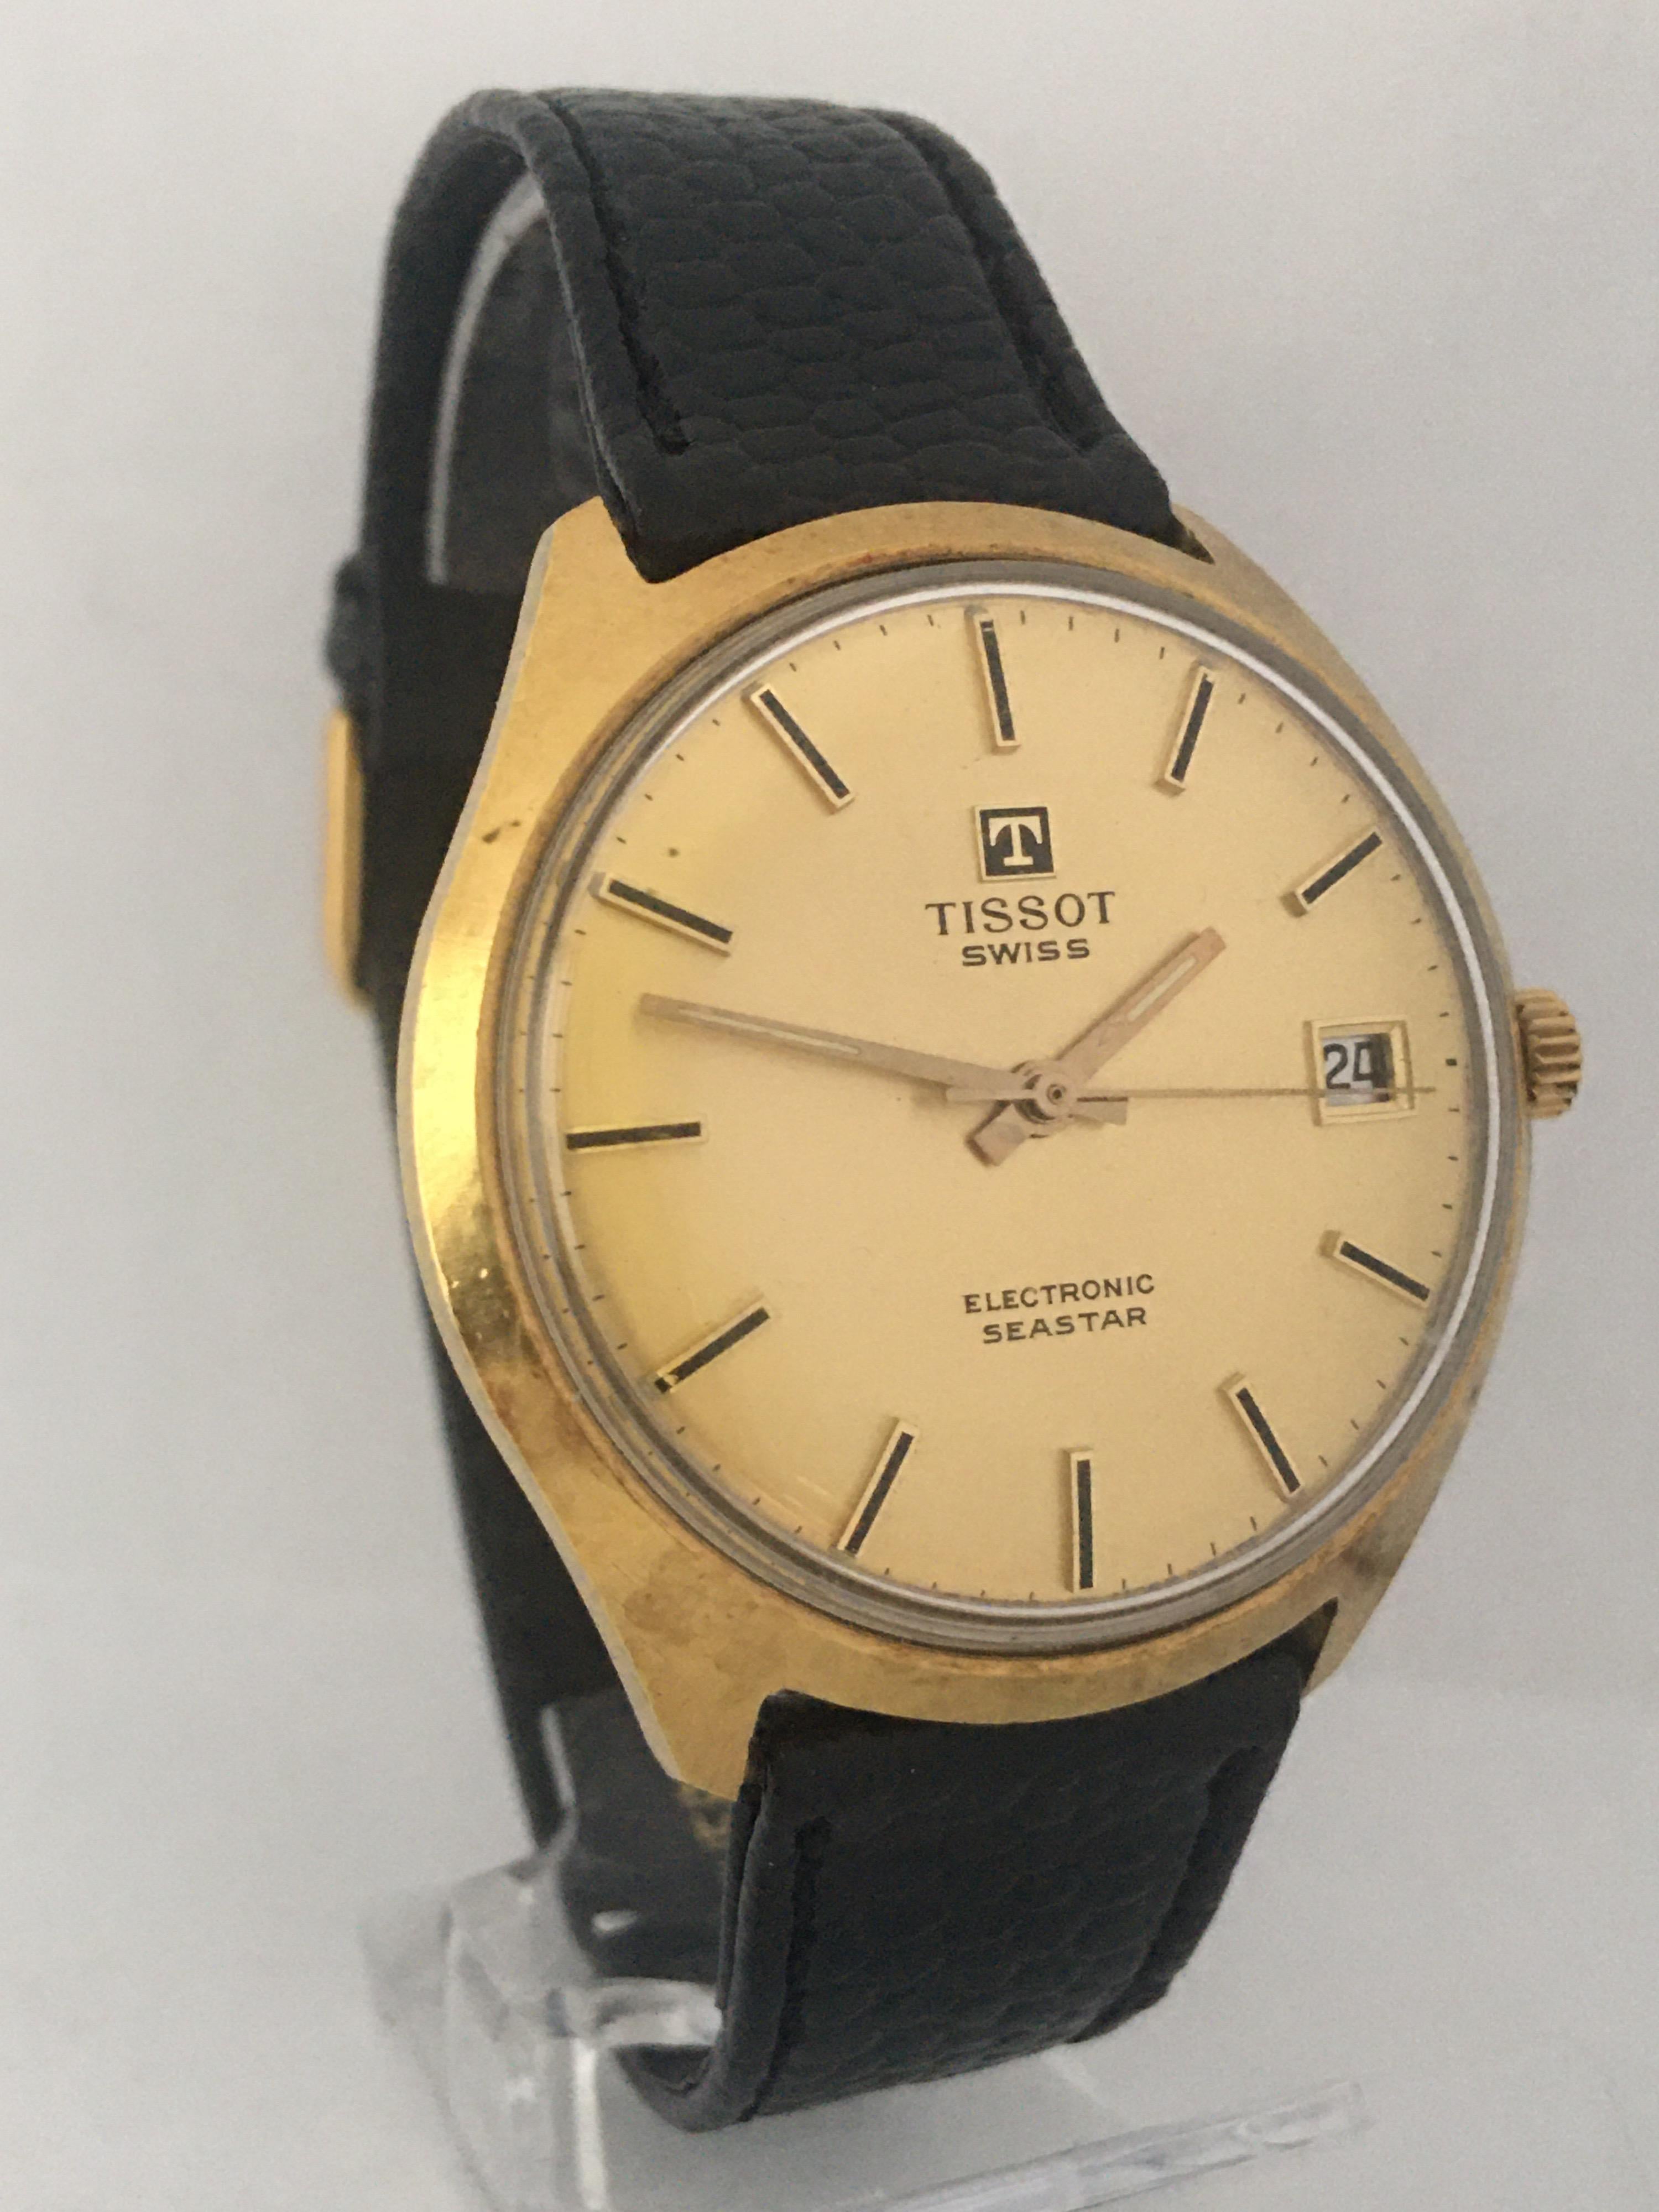 Vintage 1960s Gold-Plated TISSOT Electronic Seastar Watch For Sale 4